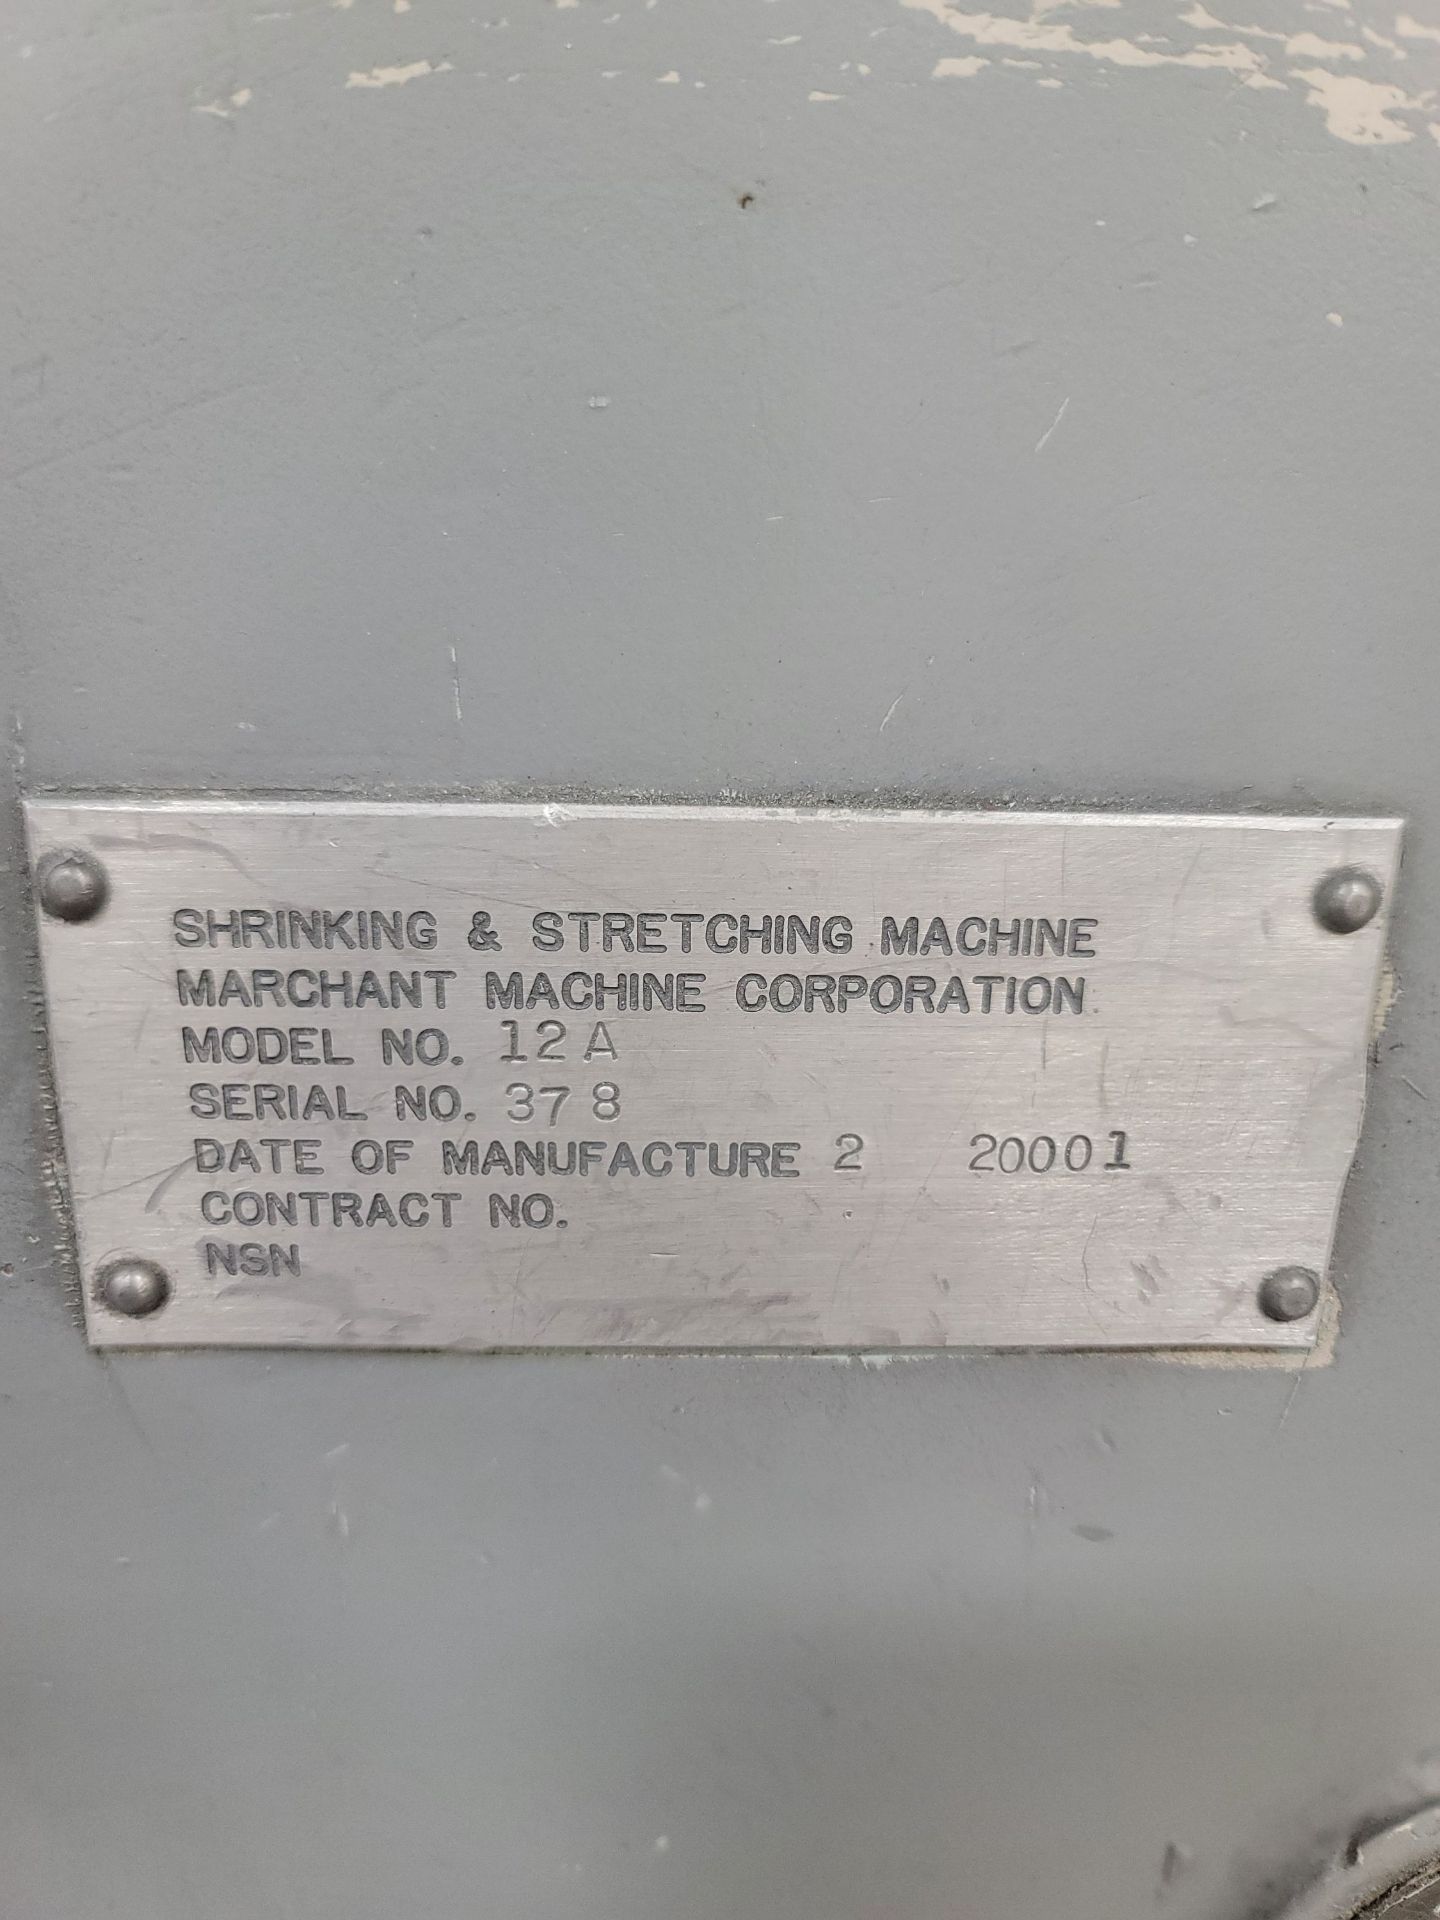 MARCHANT SHRINKING & STRETCHING MACHINE, MODEL 12A, 12" THROAT, PNEUMATIC, S/N 378 - Image 2 of 2